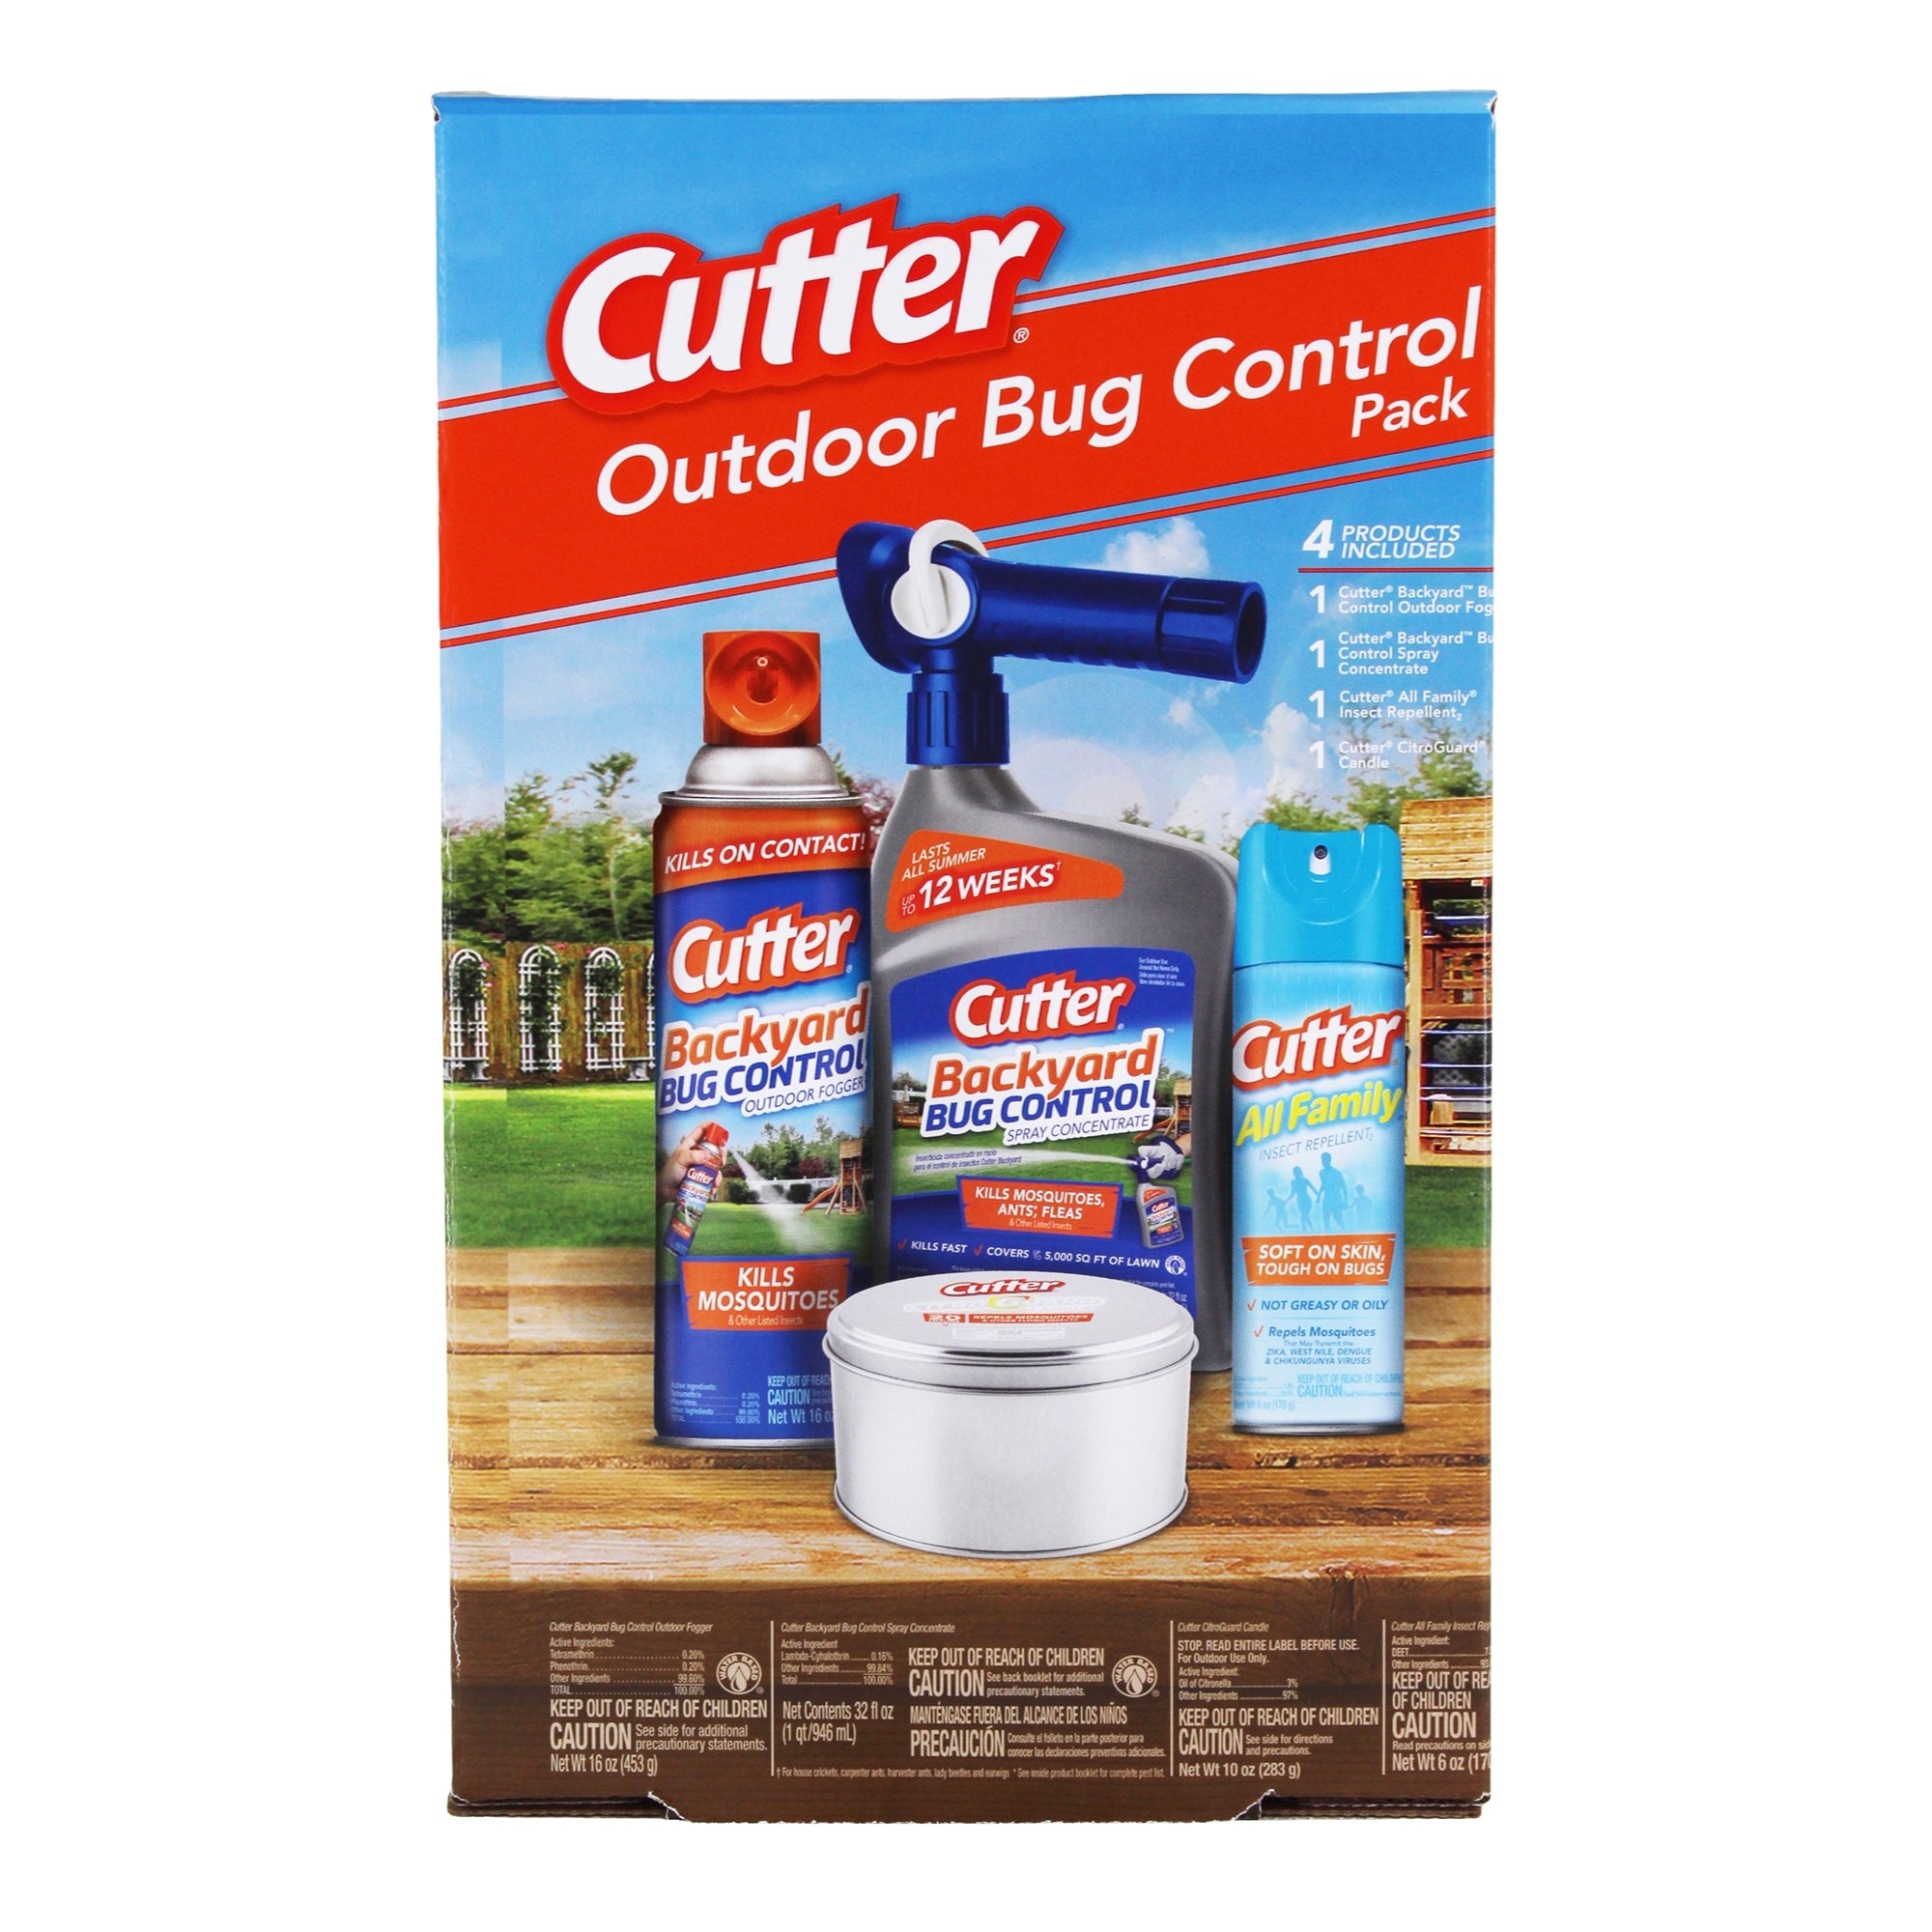 Cutter Outdoor Bug Control Pack, 4 products in 1 pack